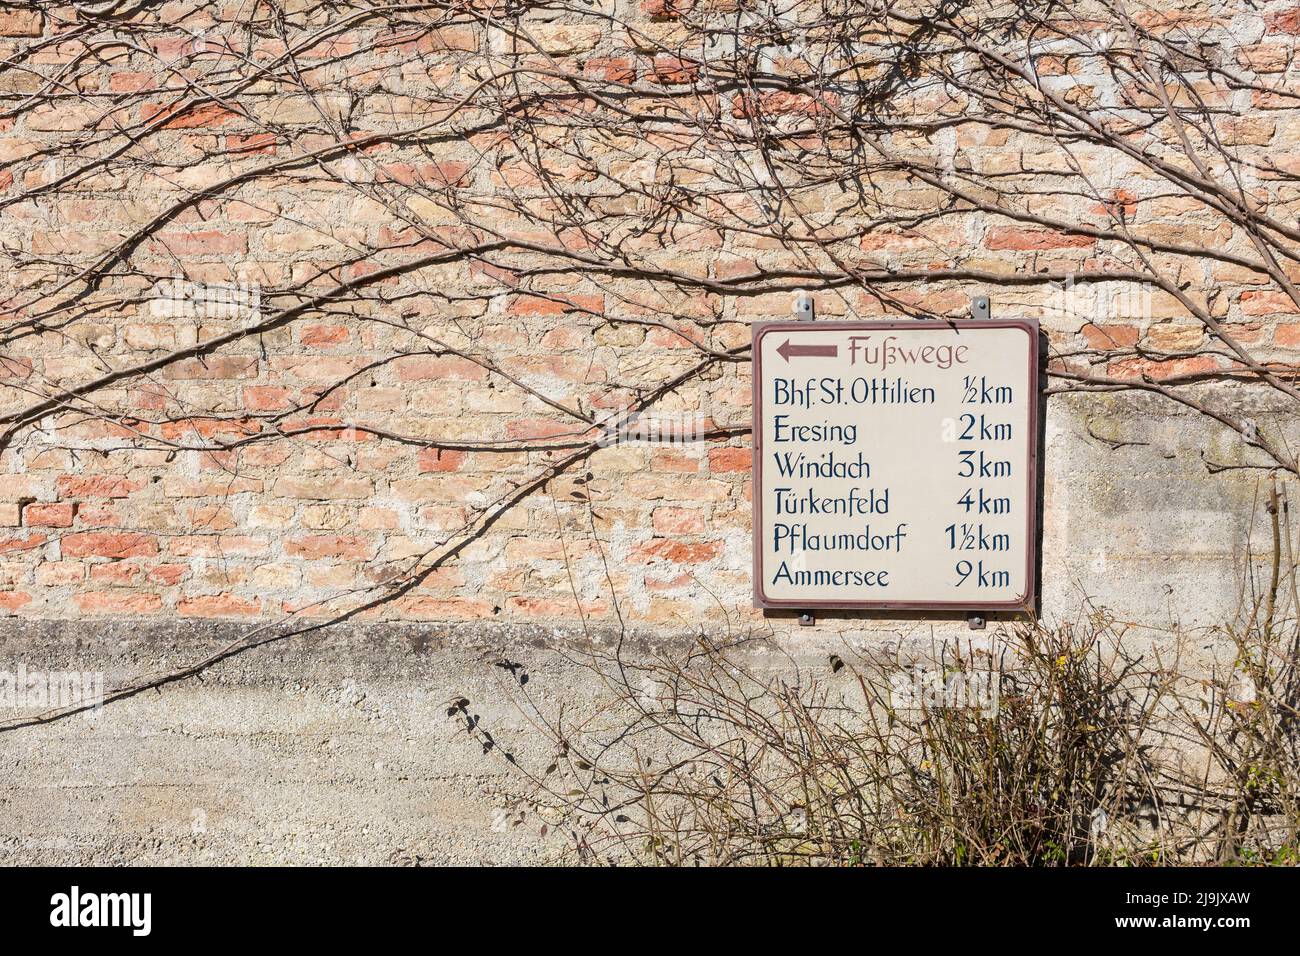 St. Ottilien, Germany - Mar 13, 2022: Sign indicating the distance of several hiking destinations in the vicinity of the Landsberg am Lech district. S Stock Photo